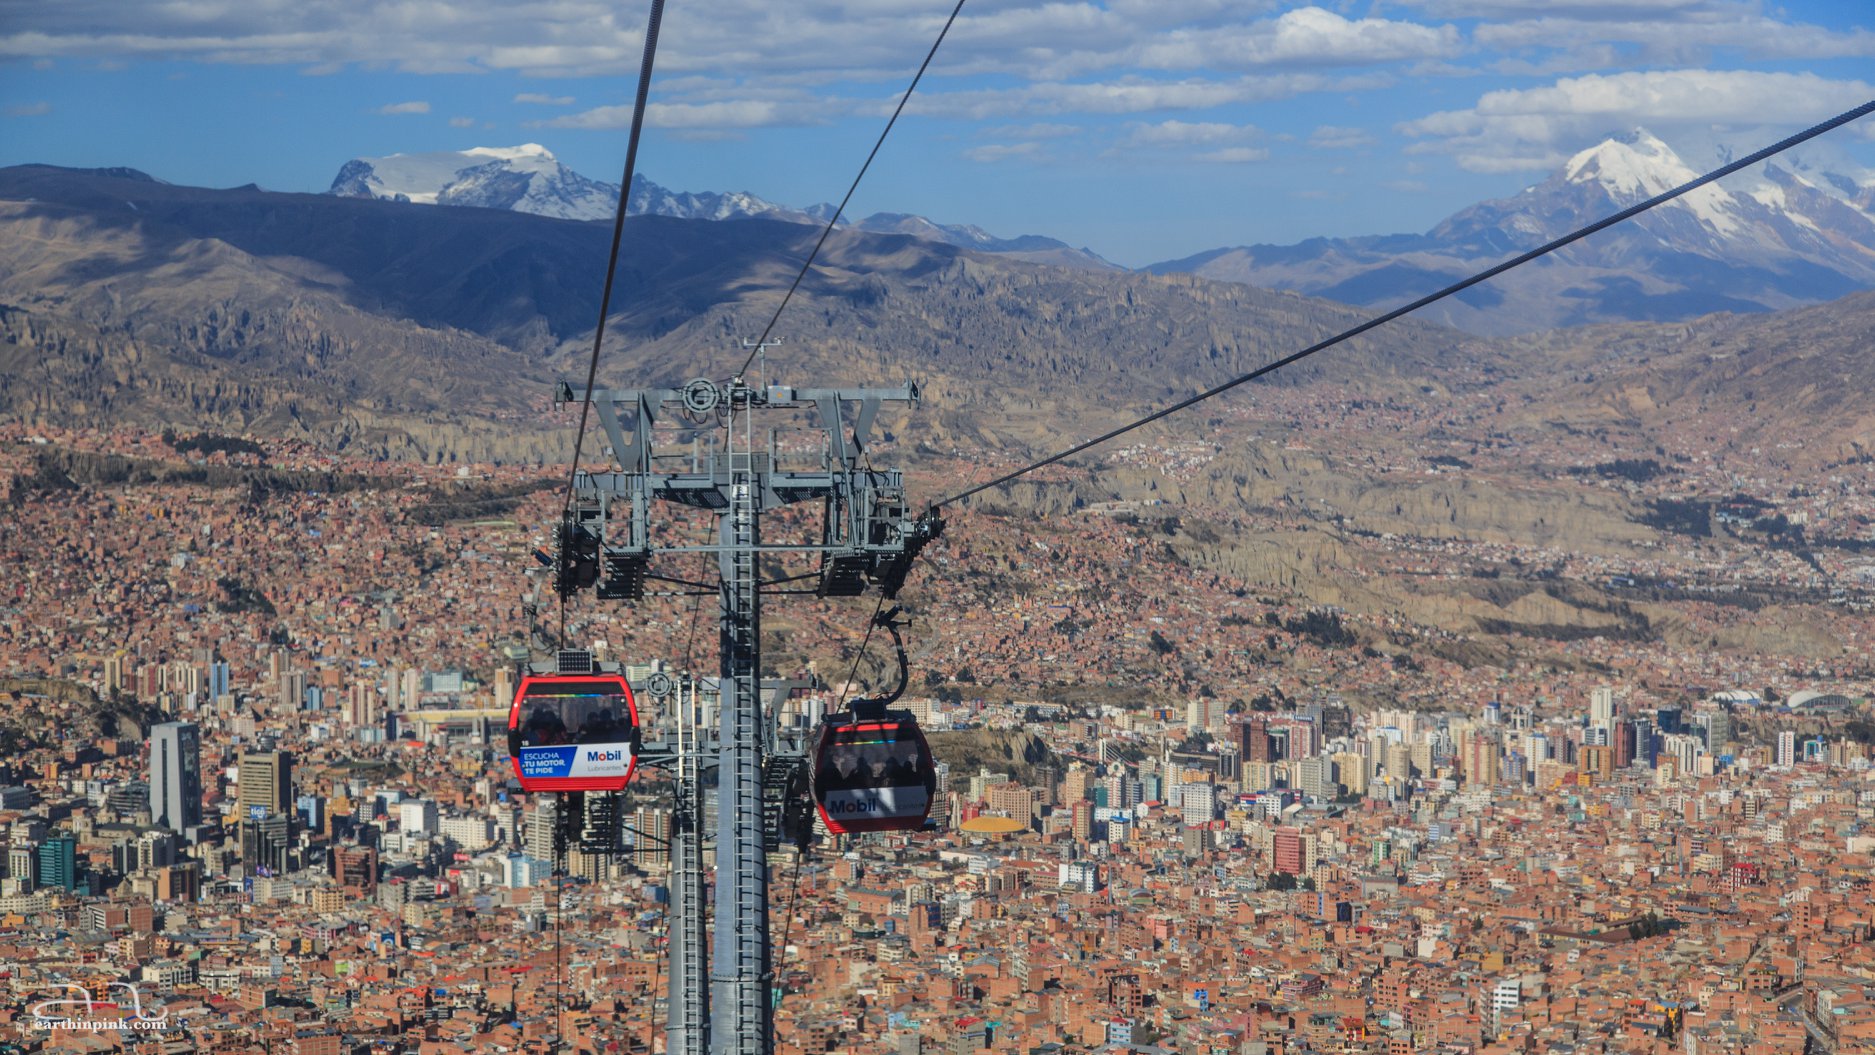 The incredible setting of La Paz, Bolivia, the highest capital in the world.